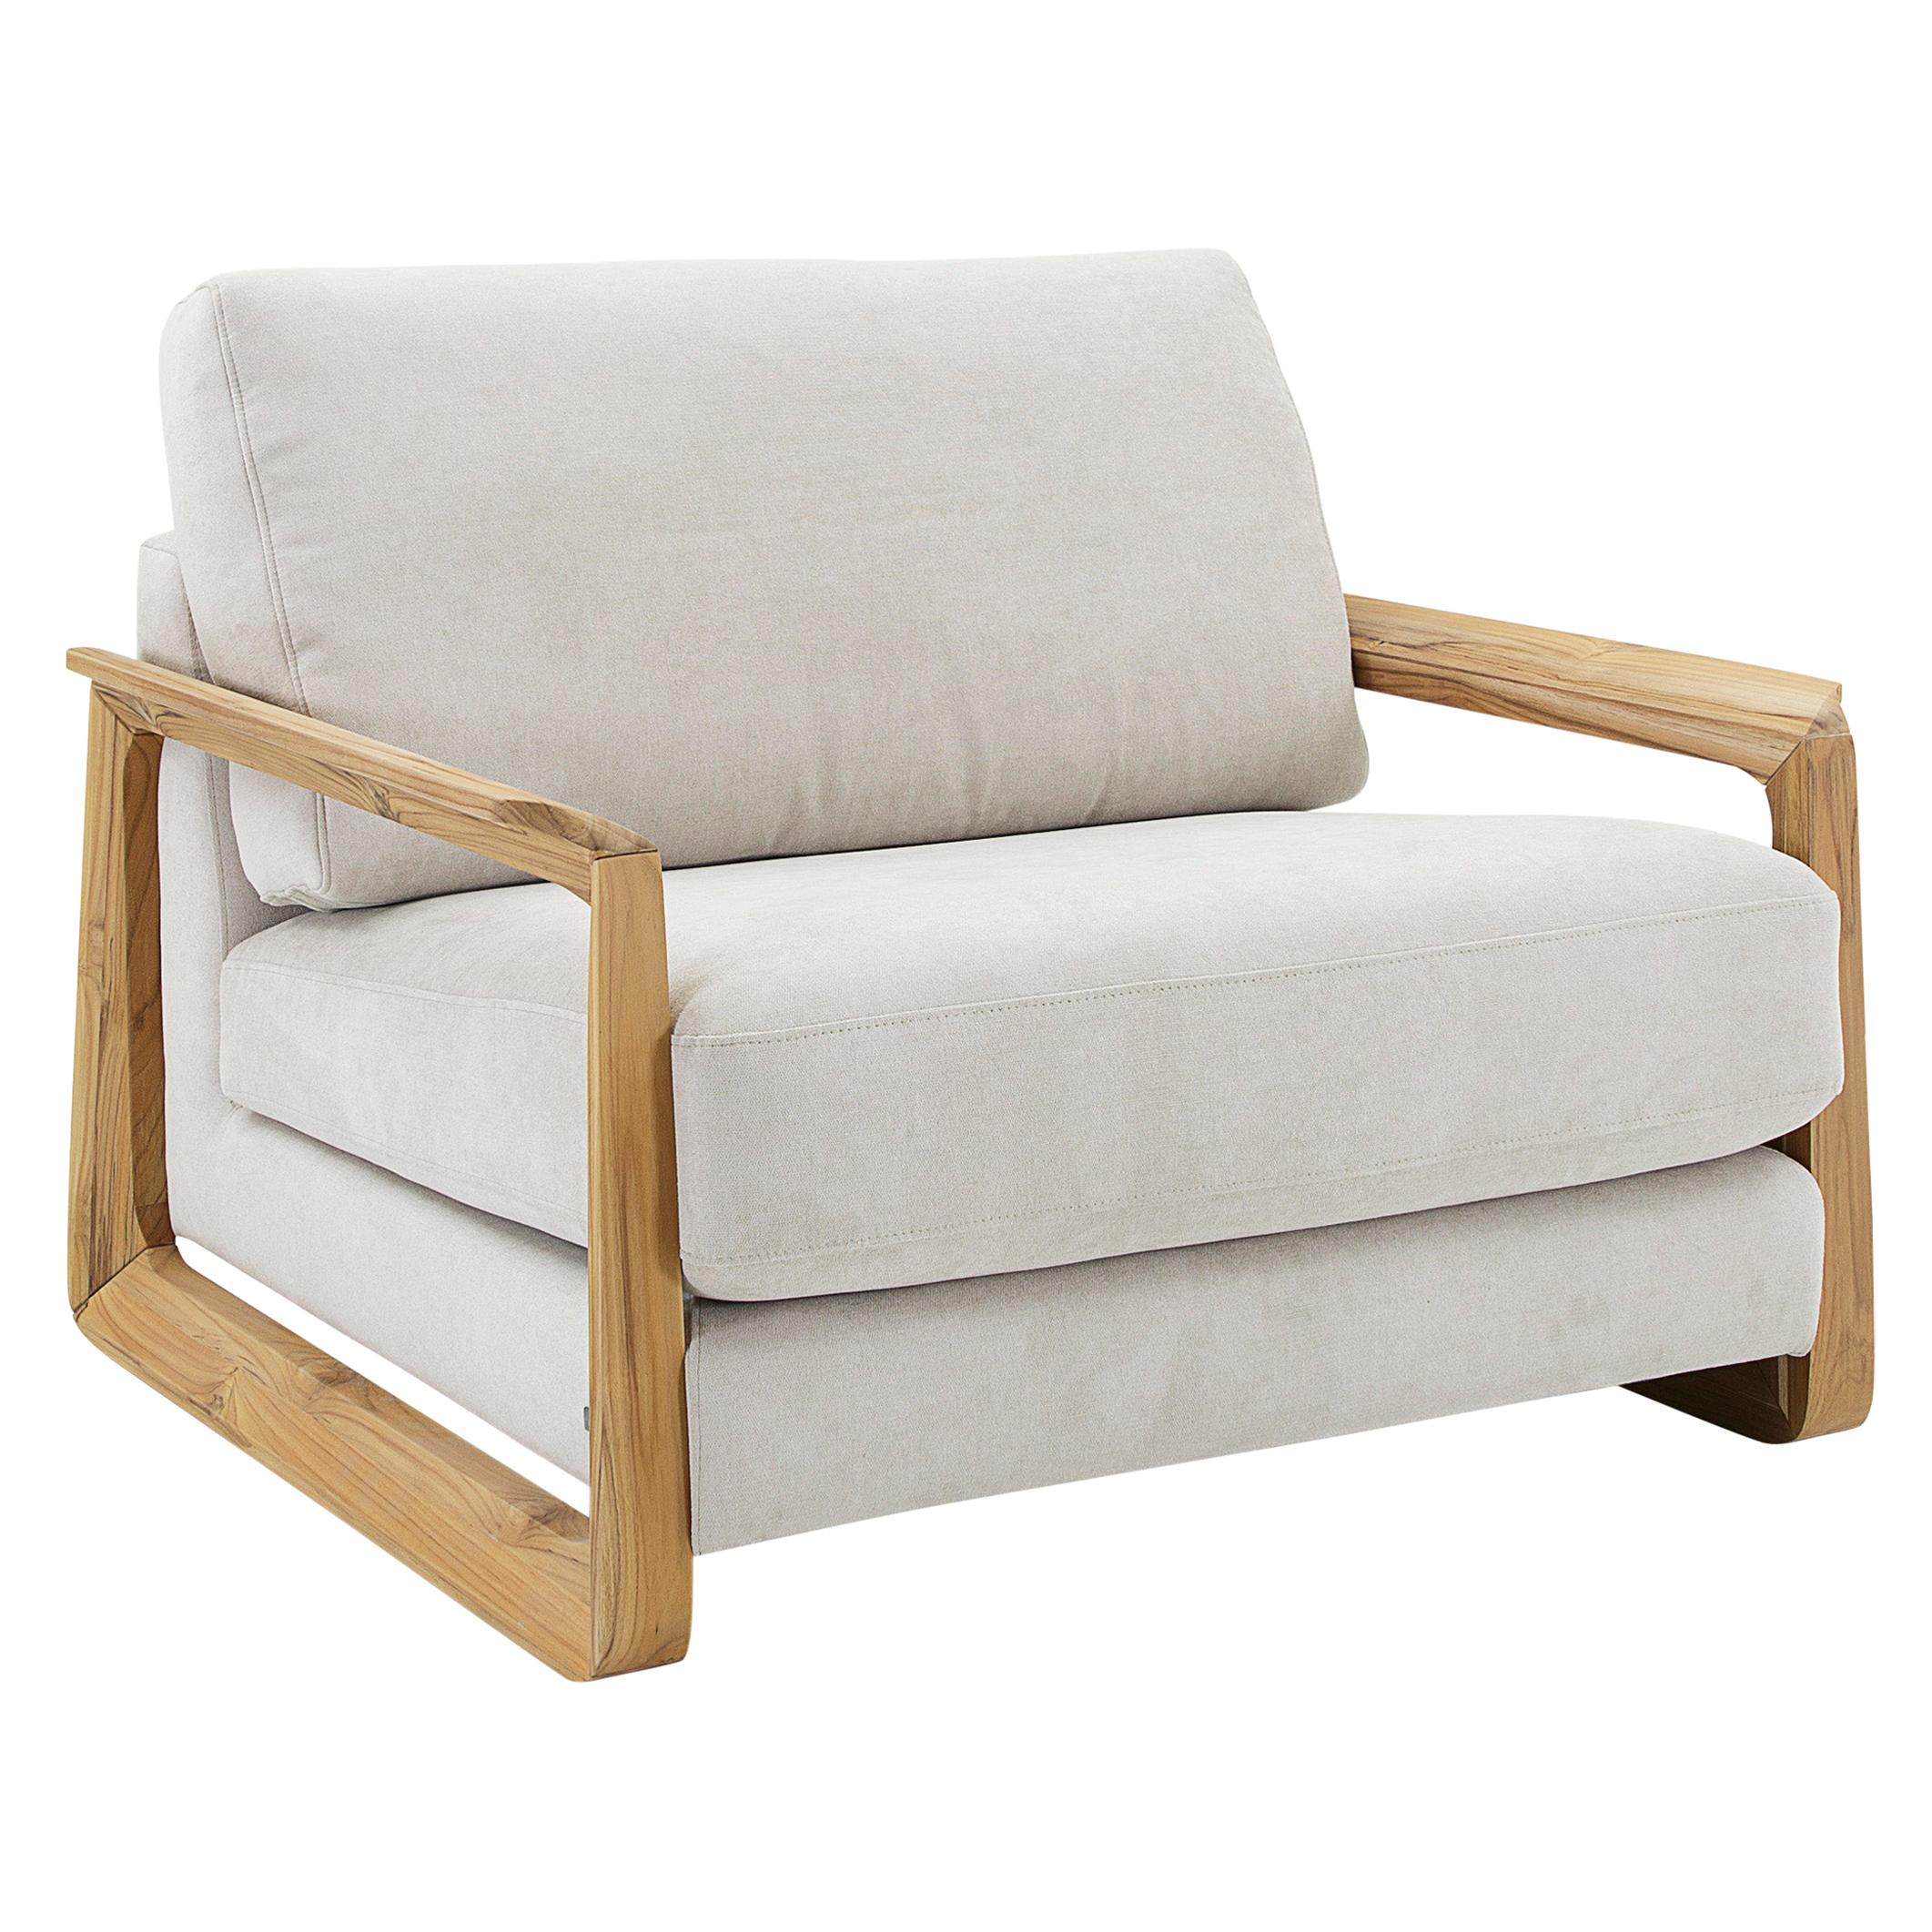 Fine Armchair Upholstered in an Oatmeal Fabric with Teak Wood Arms